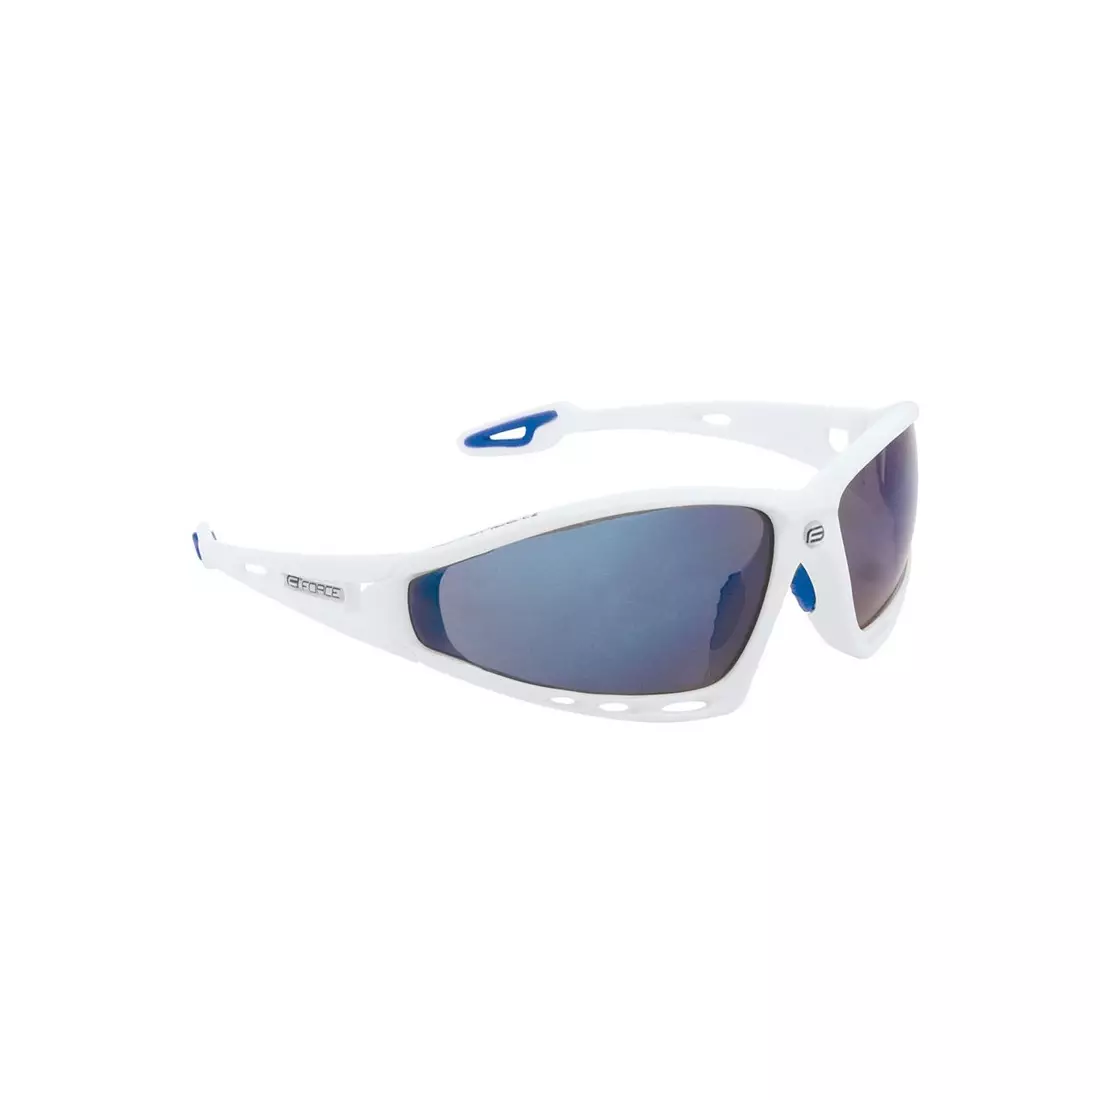 FORCE PRO glasses white and blue 90910